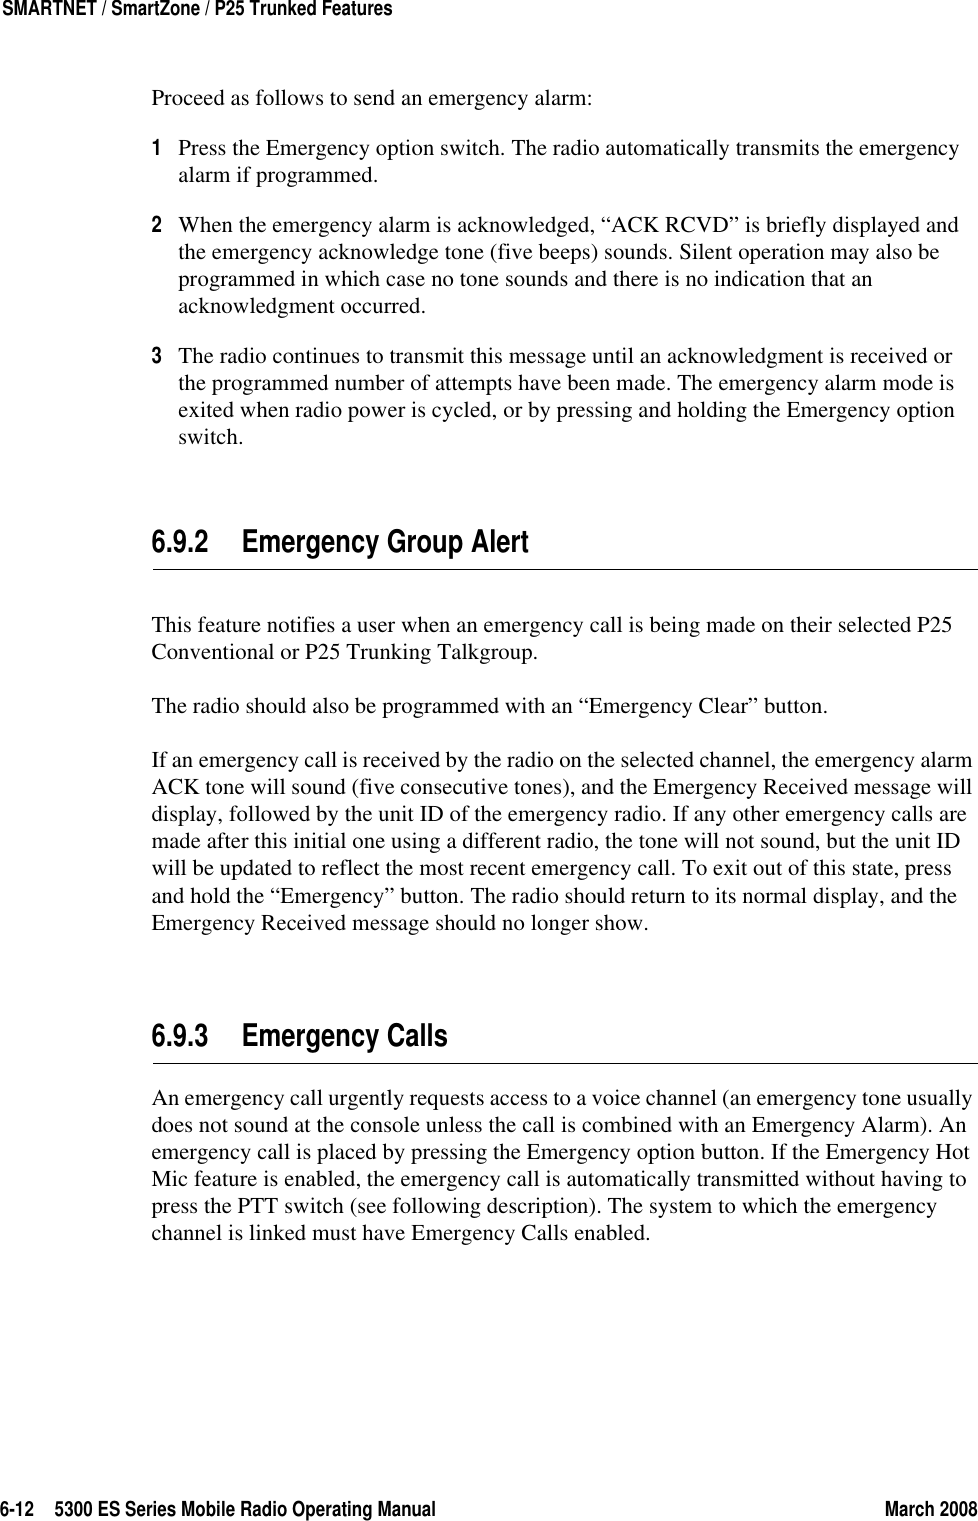 6-12 5300 ES Series Mobile Radio Operating Manual March 2008SMARTNET / SmartZone / P25 Trunked FeaturesProceed as follows to send an emergency alarm:1Press the Emergency option switch. The radio automatically transmits the emergency alarm if programmed.2When the emergency alarm is acknowledged, “ACK RCVD” is briefly displayed and the emergency acknowledge tone (five beeps) sounds. Silent operation may also be programmed in which case no tone sounds and there is no indication that an acknowledgment occurred.3The radio continues to transmit this message until an acknowledgment is received or the programmed number of attempts have been made. The emergency alarm mode is exited when radio power is cycled, or by pressing and holding the Emergency option switch.6.9.2 Emergency Group AlertThis feature notifies a user when an emergency call is being made on their selected P25 Conventional or P25 Trunking Talkgroup.The radio should also be programmed with an “Emergency Clear” button.If an emergency call is received by the radio on the selected channel, the emergency alarm ACK tone will sound (five consecutive tones), and the Emergency Received message will display, followed by the unit ID of the emergency radio. If any other emergency calls are made after this initial one using a different radio, the tone will not sound, but the unit ID will be updated to reflect the most recent emergency call. To exit out of this state, press and hold the “Emergency” button. The radio should return to its normal display, and the Emergency Received message should no longer show.6.9.3 Emergency CallsAn emergency call urgently requests access to a voice channel (an emergency tone usually does not sound at the console unless the call is combined with an Emergency Alarm). An emergency call is placed by pressing the Emergency option button. If the Emergency Hot Mic feature is enabled, the emergency call is automatically transmitted without having to press the PTT switch (see following description). The system to which the emergency channel is linked must have Emergency Calls enabled.